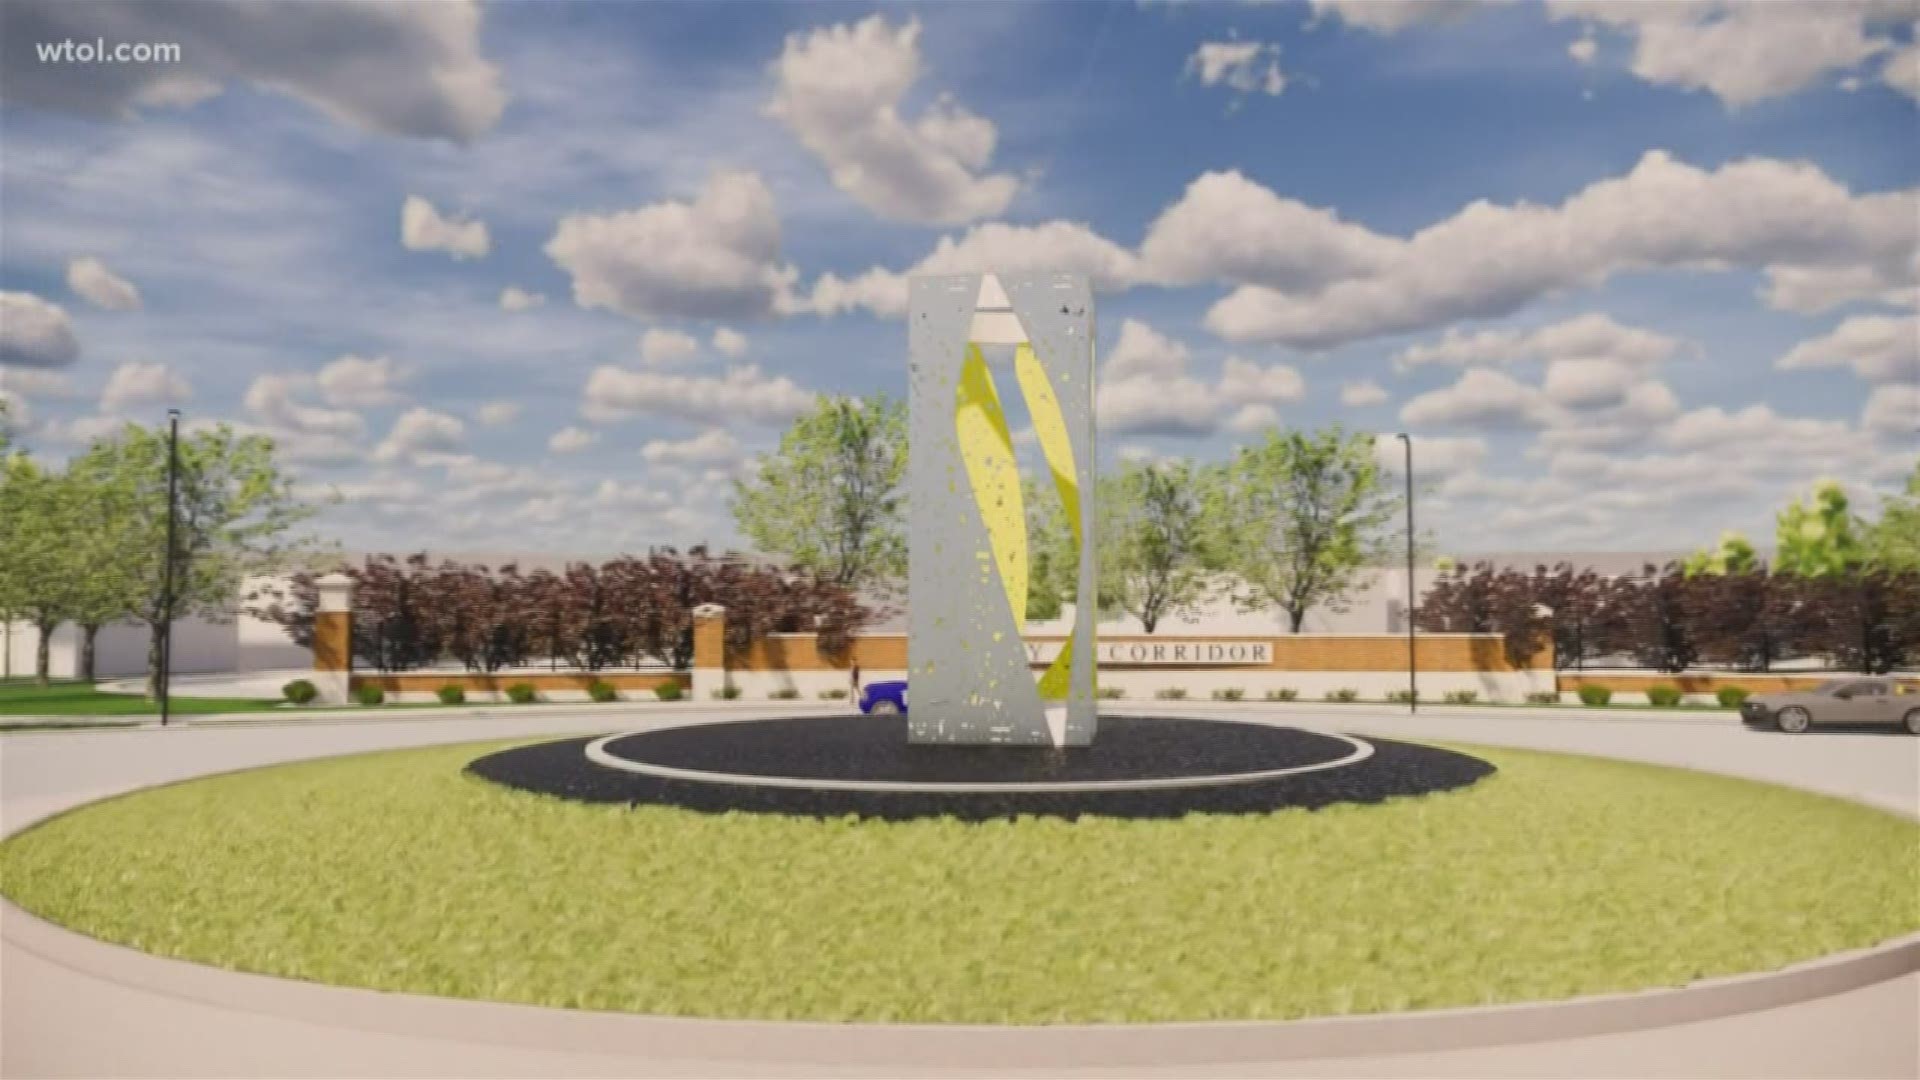 The Toledo Arts Commission has been working with the neighborhood on a sculpture for the roundabout that will serve as a landmark for the city. The lantern-like structure is to be installed in the spring and will be visible from the expressway.